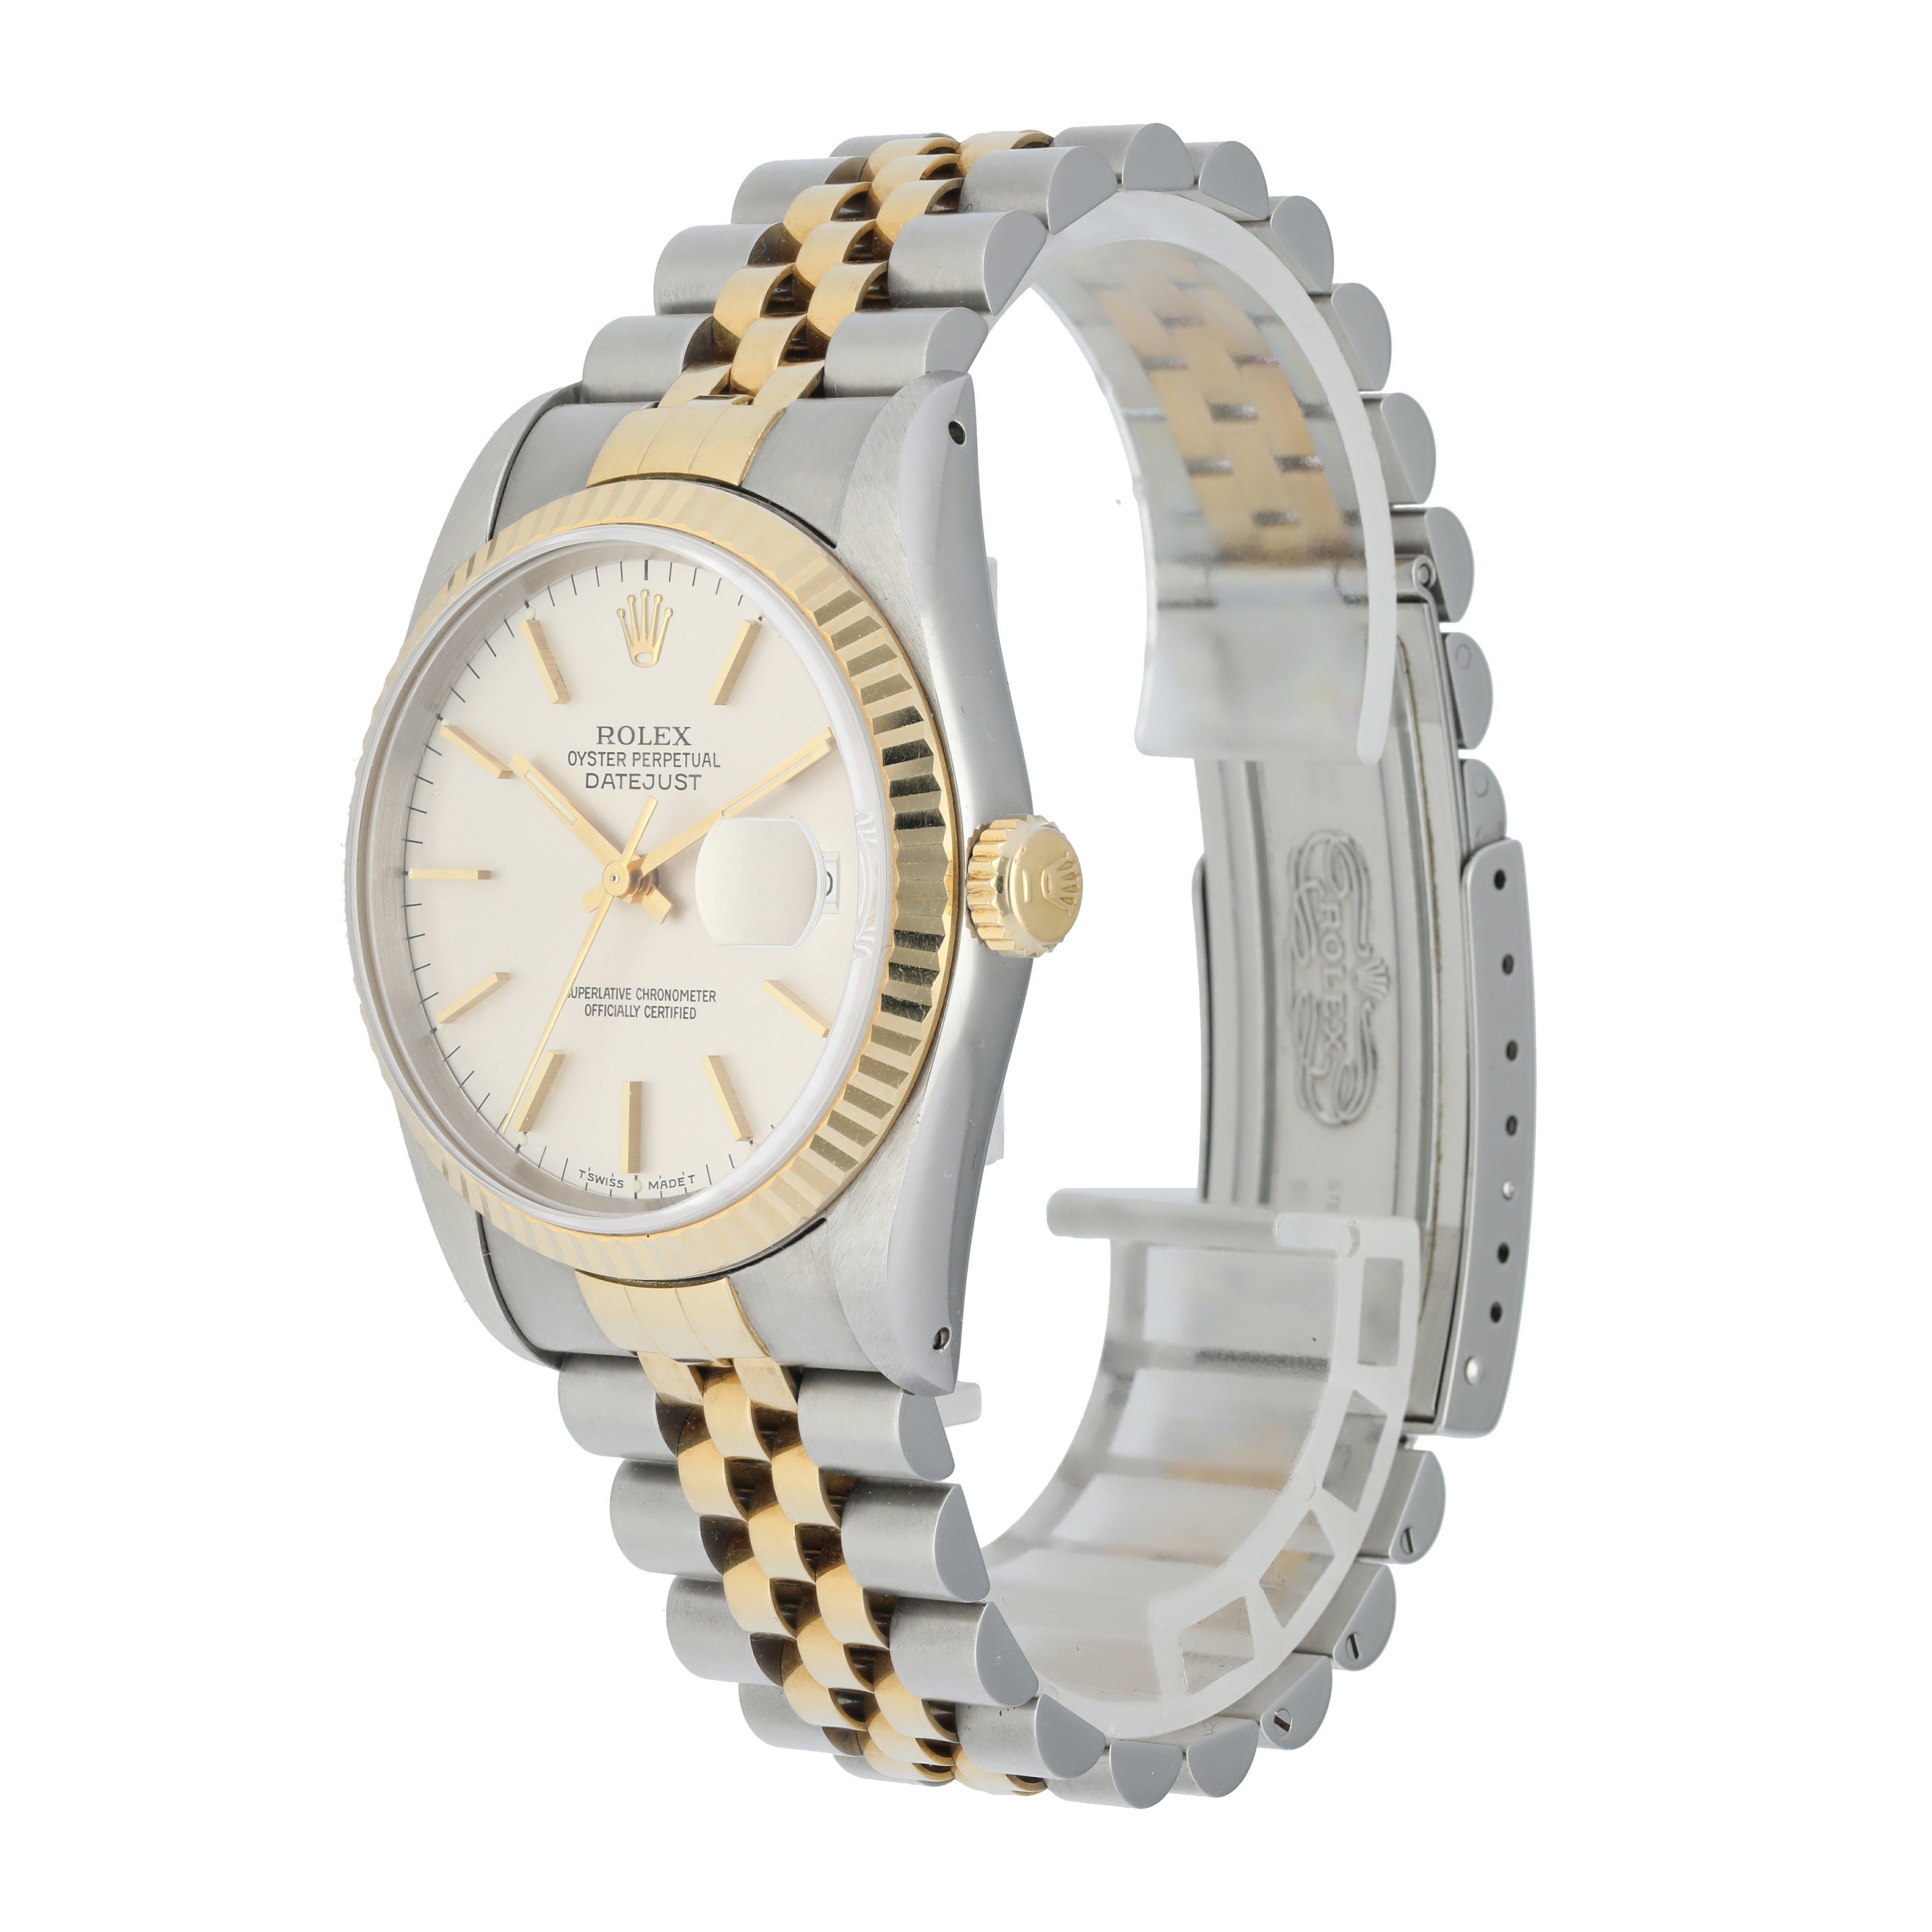 Rolex Datejust 16233 men's Watch.
356mm stainless steel case with yellow gold fluted bezel.
silver dial with luminous gold hands and index hour markers.
Minute markers on the outer dial.
Date display at the 3 o'clock position.
stainless steel